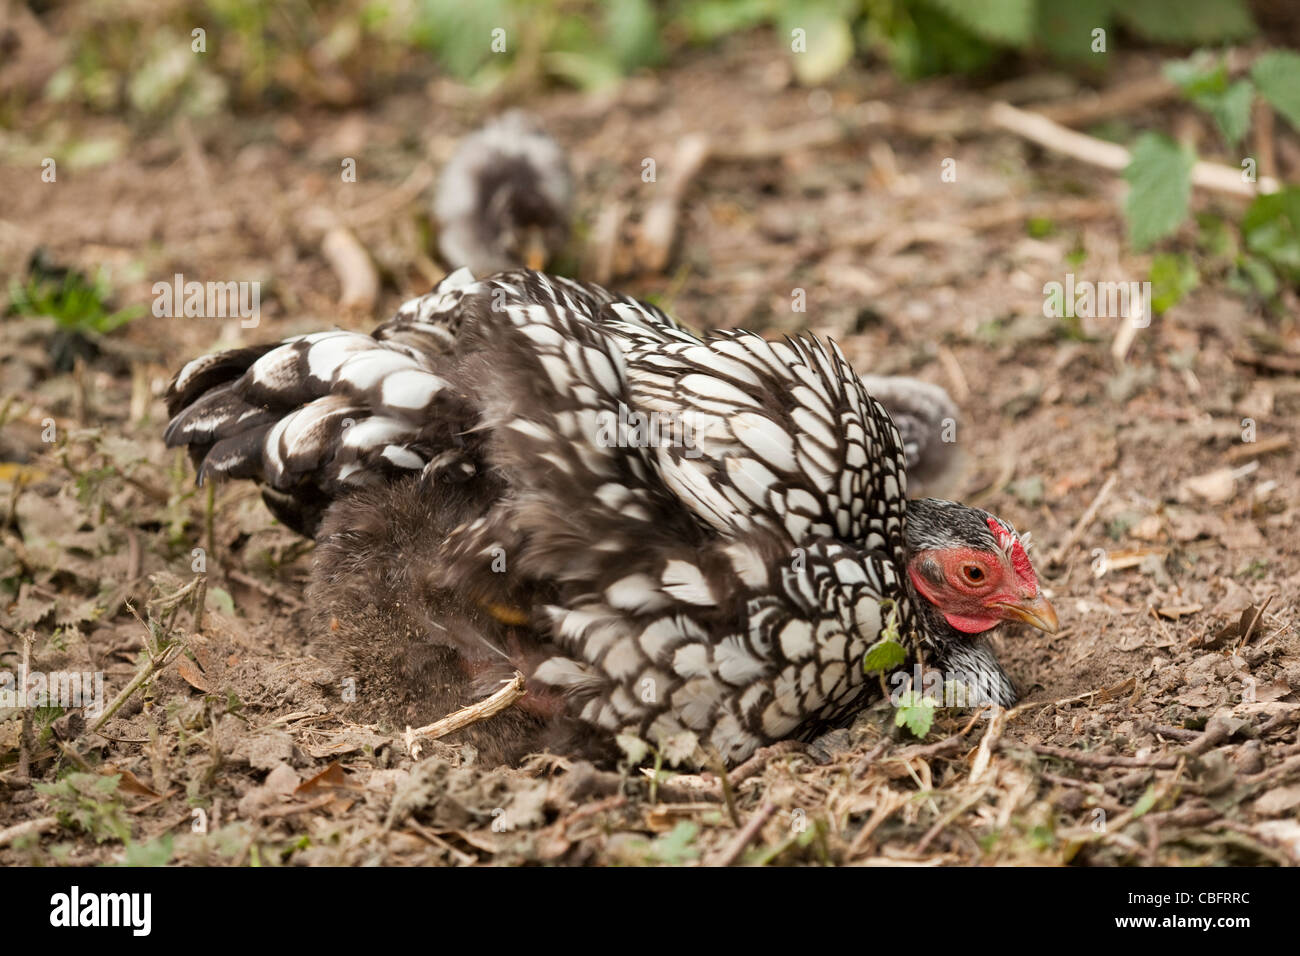 Silver-laced Wyandotte Bantam Hen (Gallus gallus). Broody, with a chick, dust bathing. Stock Photo